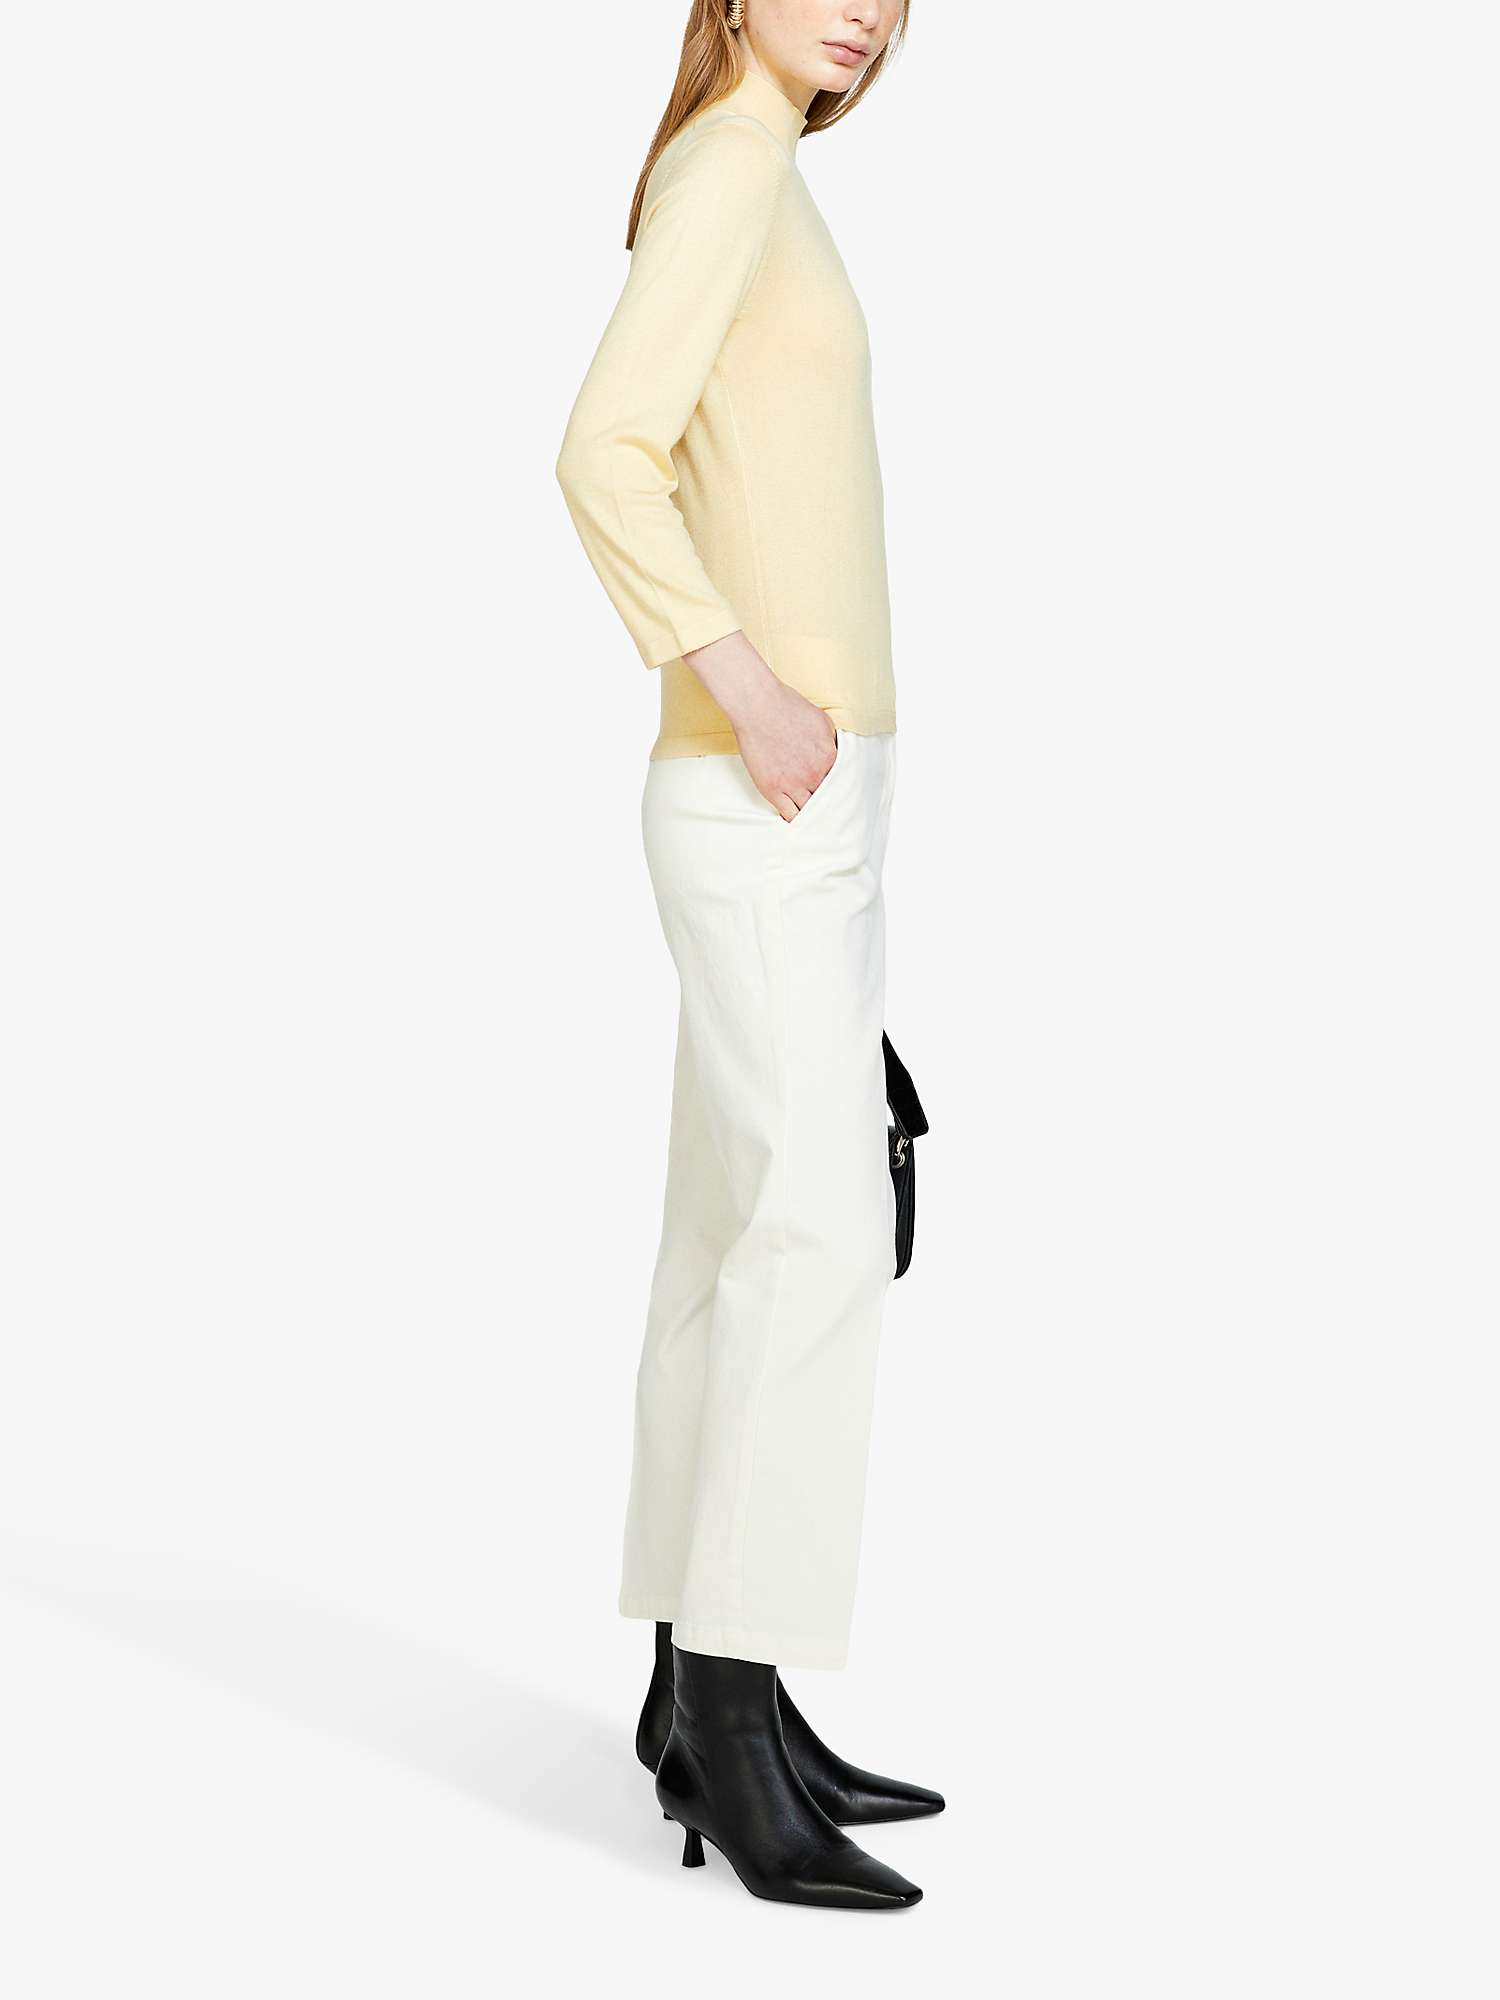 Buy SISLEY Plain Tailored Cropped Trousers, Cream Online at johnlewis.com